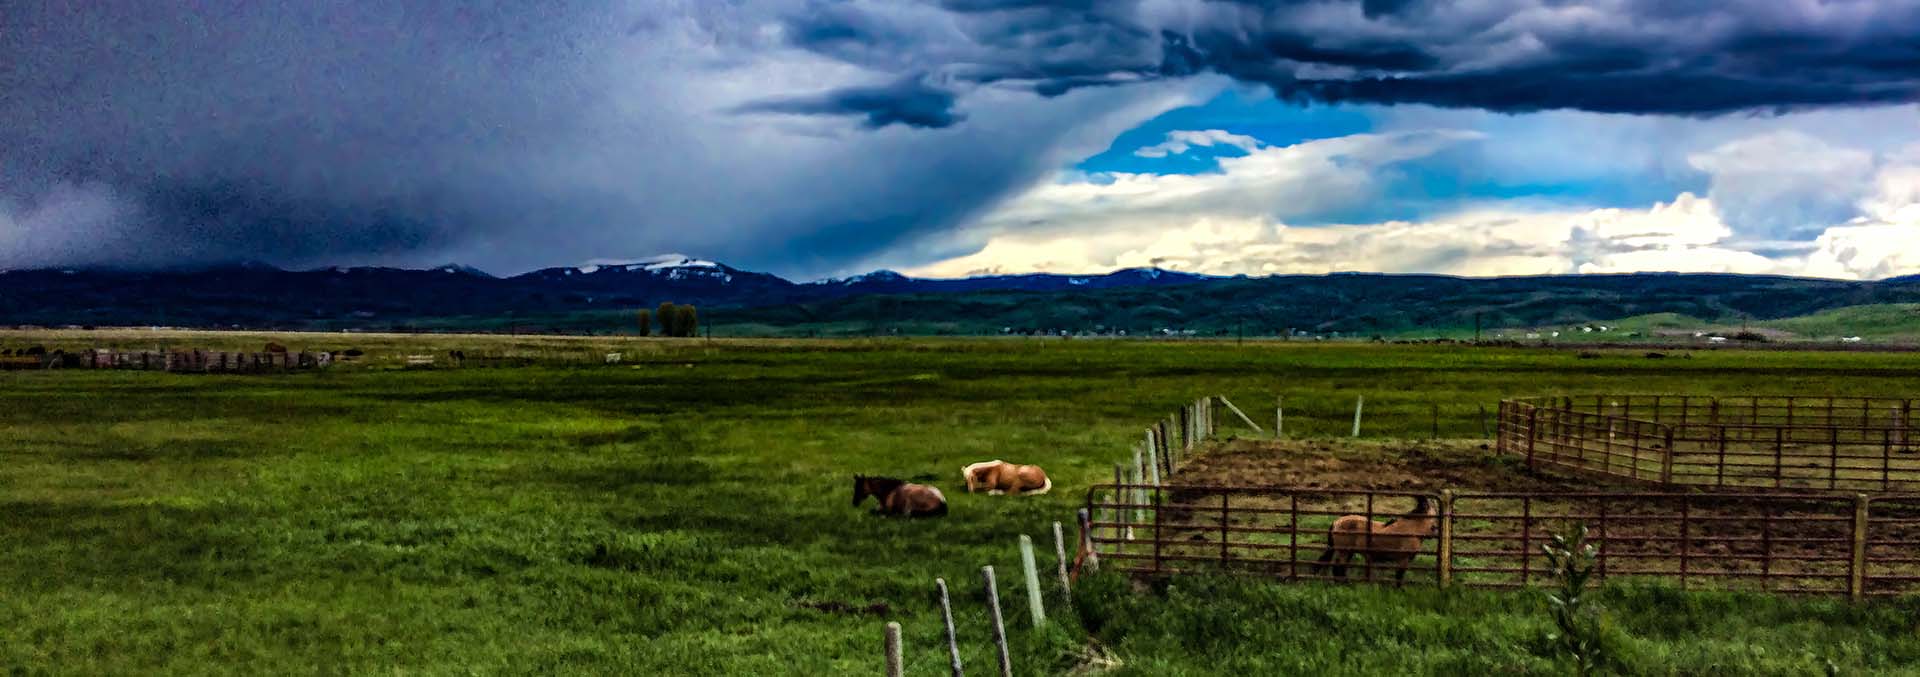 idaho cattle ranches for sale diamond heart ranch